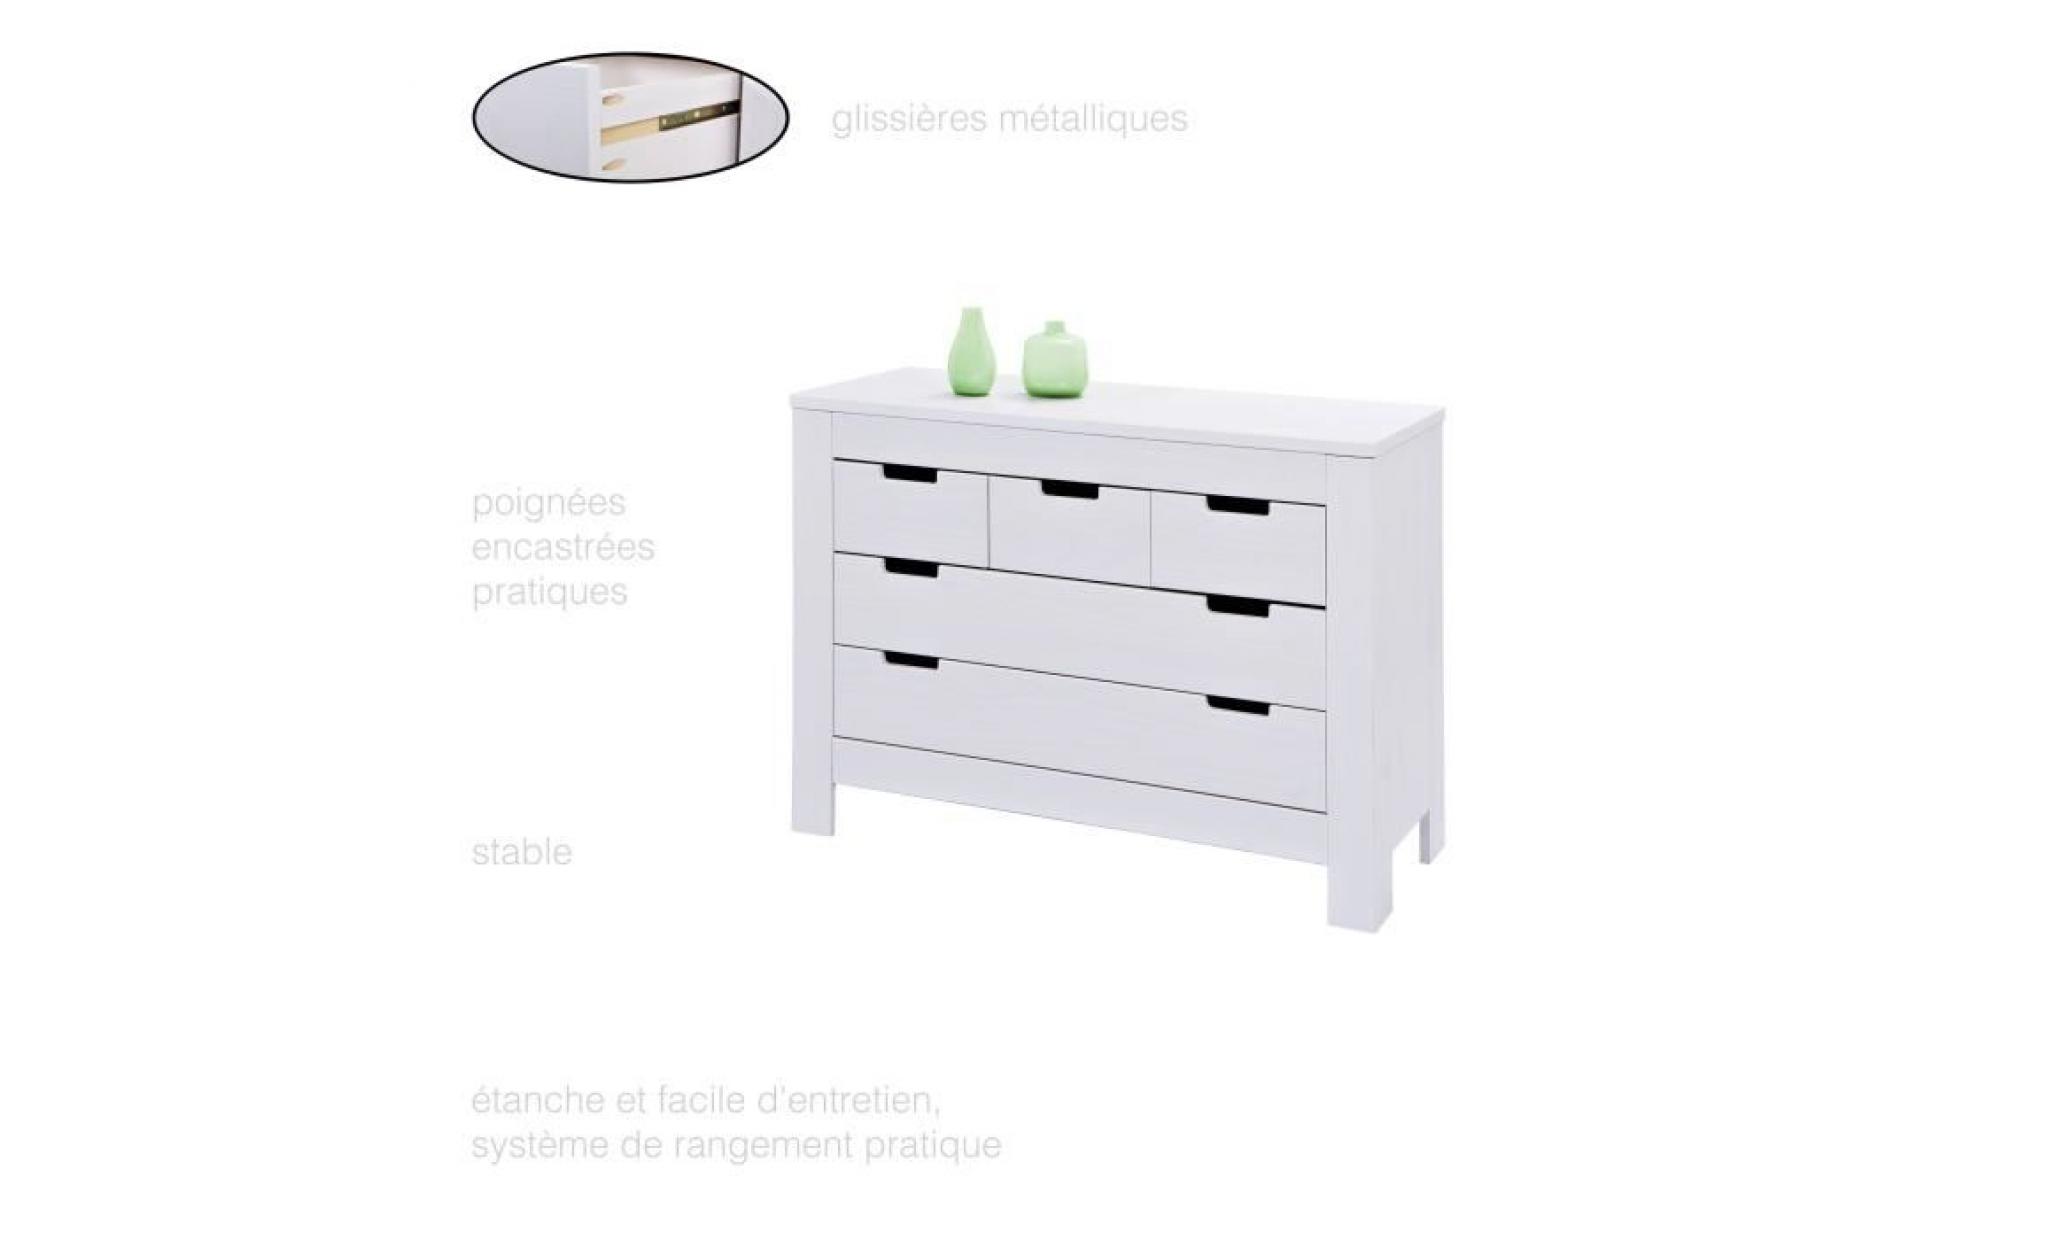 grande commode 5 tiroirs, commode en pin massif, commode chambre blanche, commode chiffonnier, armoire commode, meuble en pin